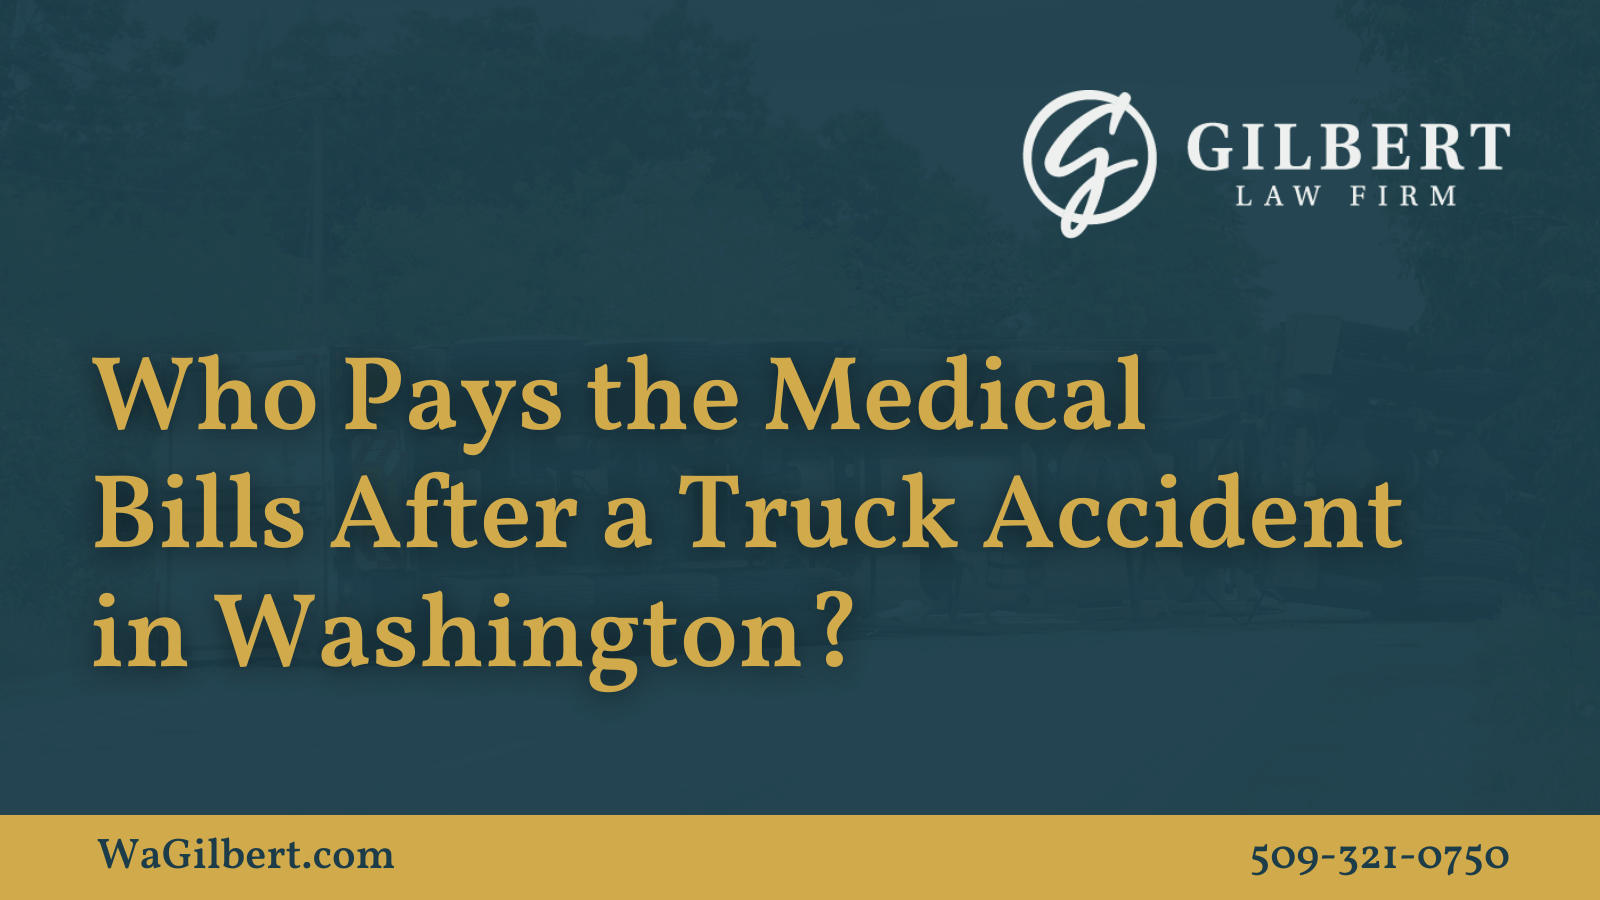 Who Pays the Medical Bills After a Truck Accident in washington | Gilbert Law Firm Spokane Washington